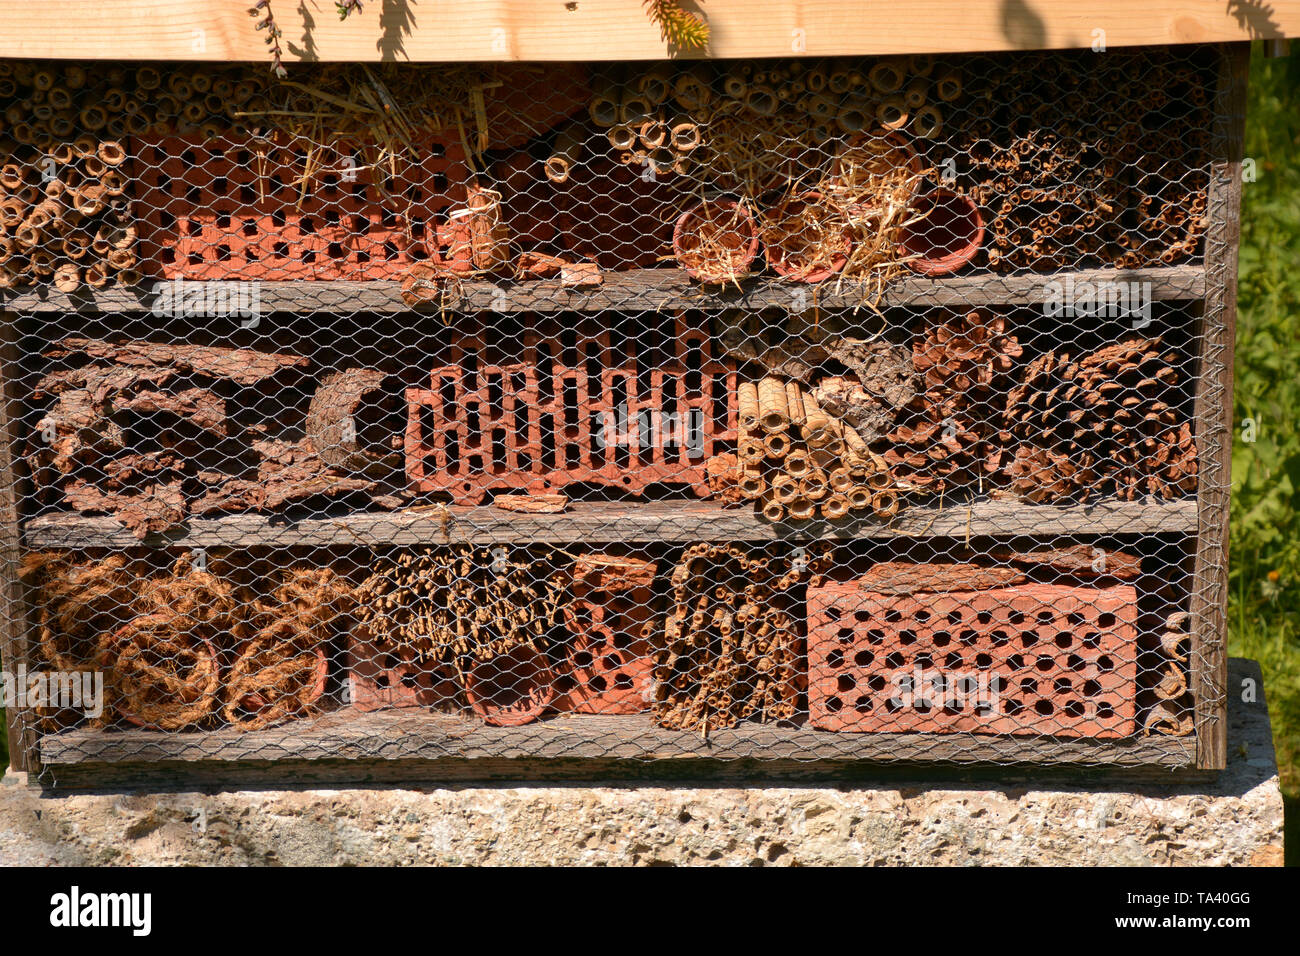 Does A Bug Hotel Need To Be In Sun: Sun or Shade?